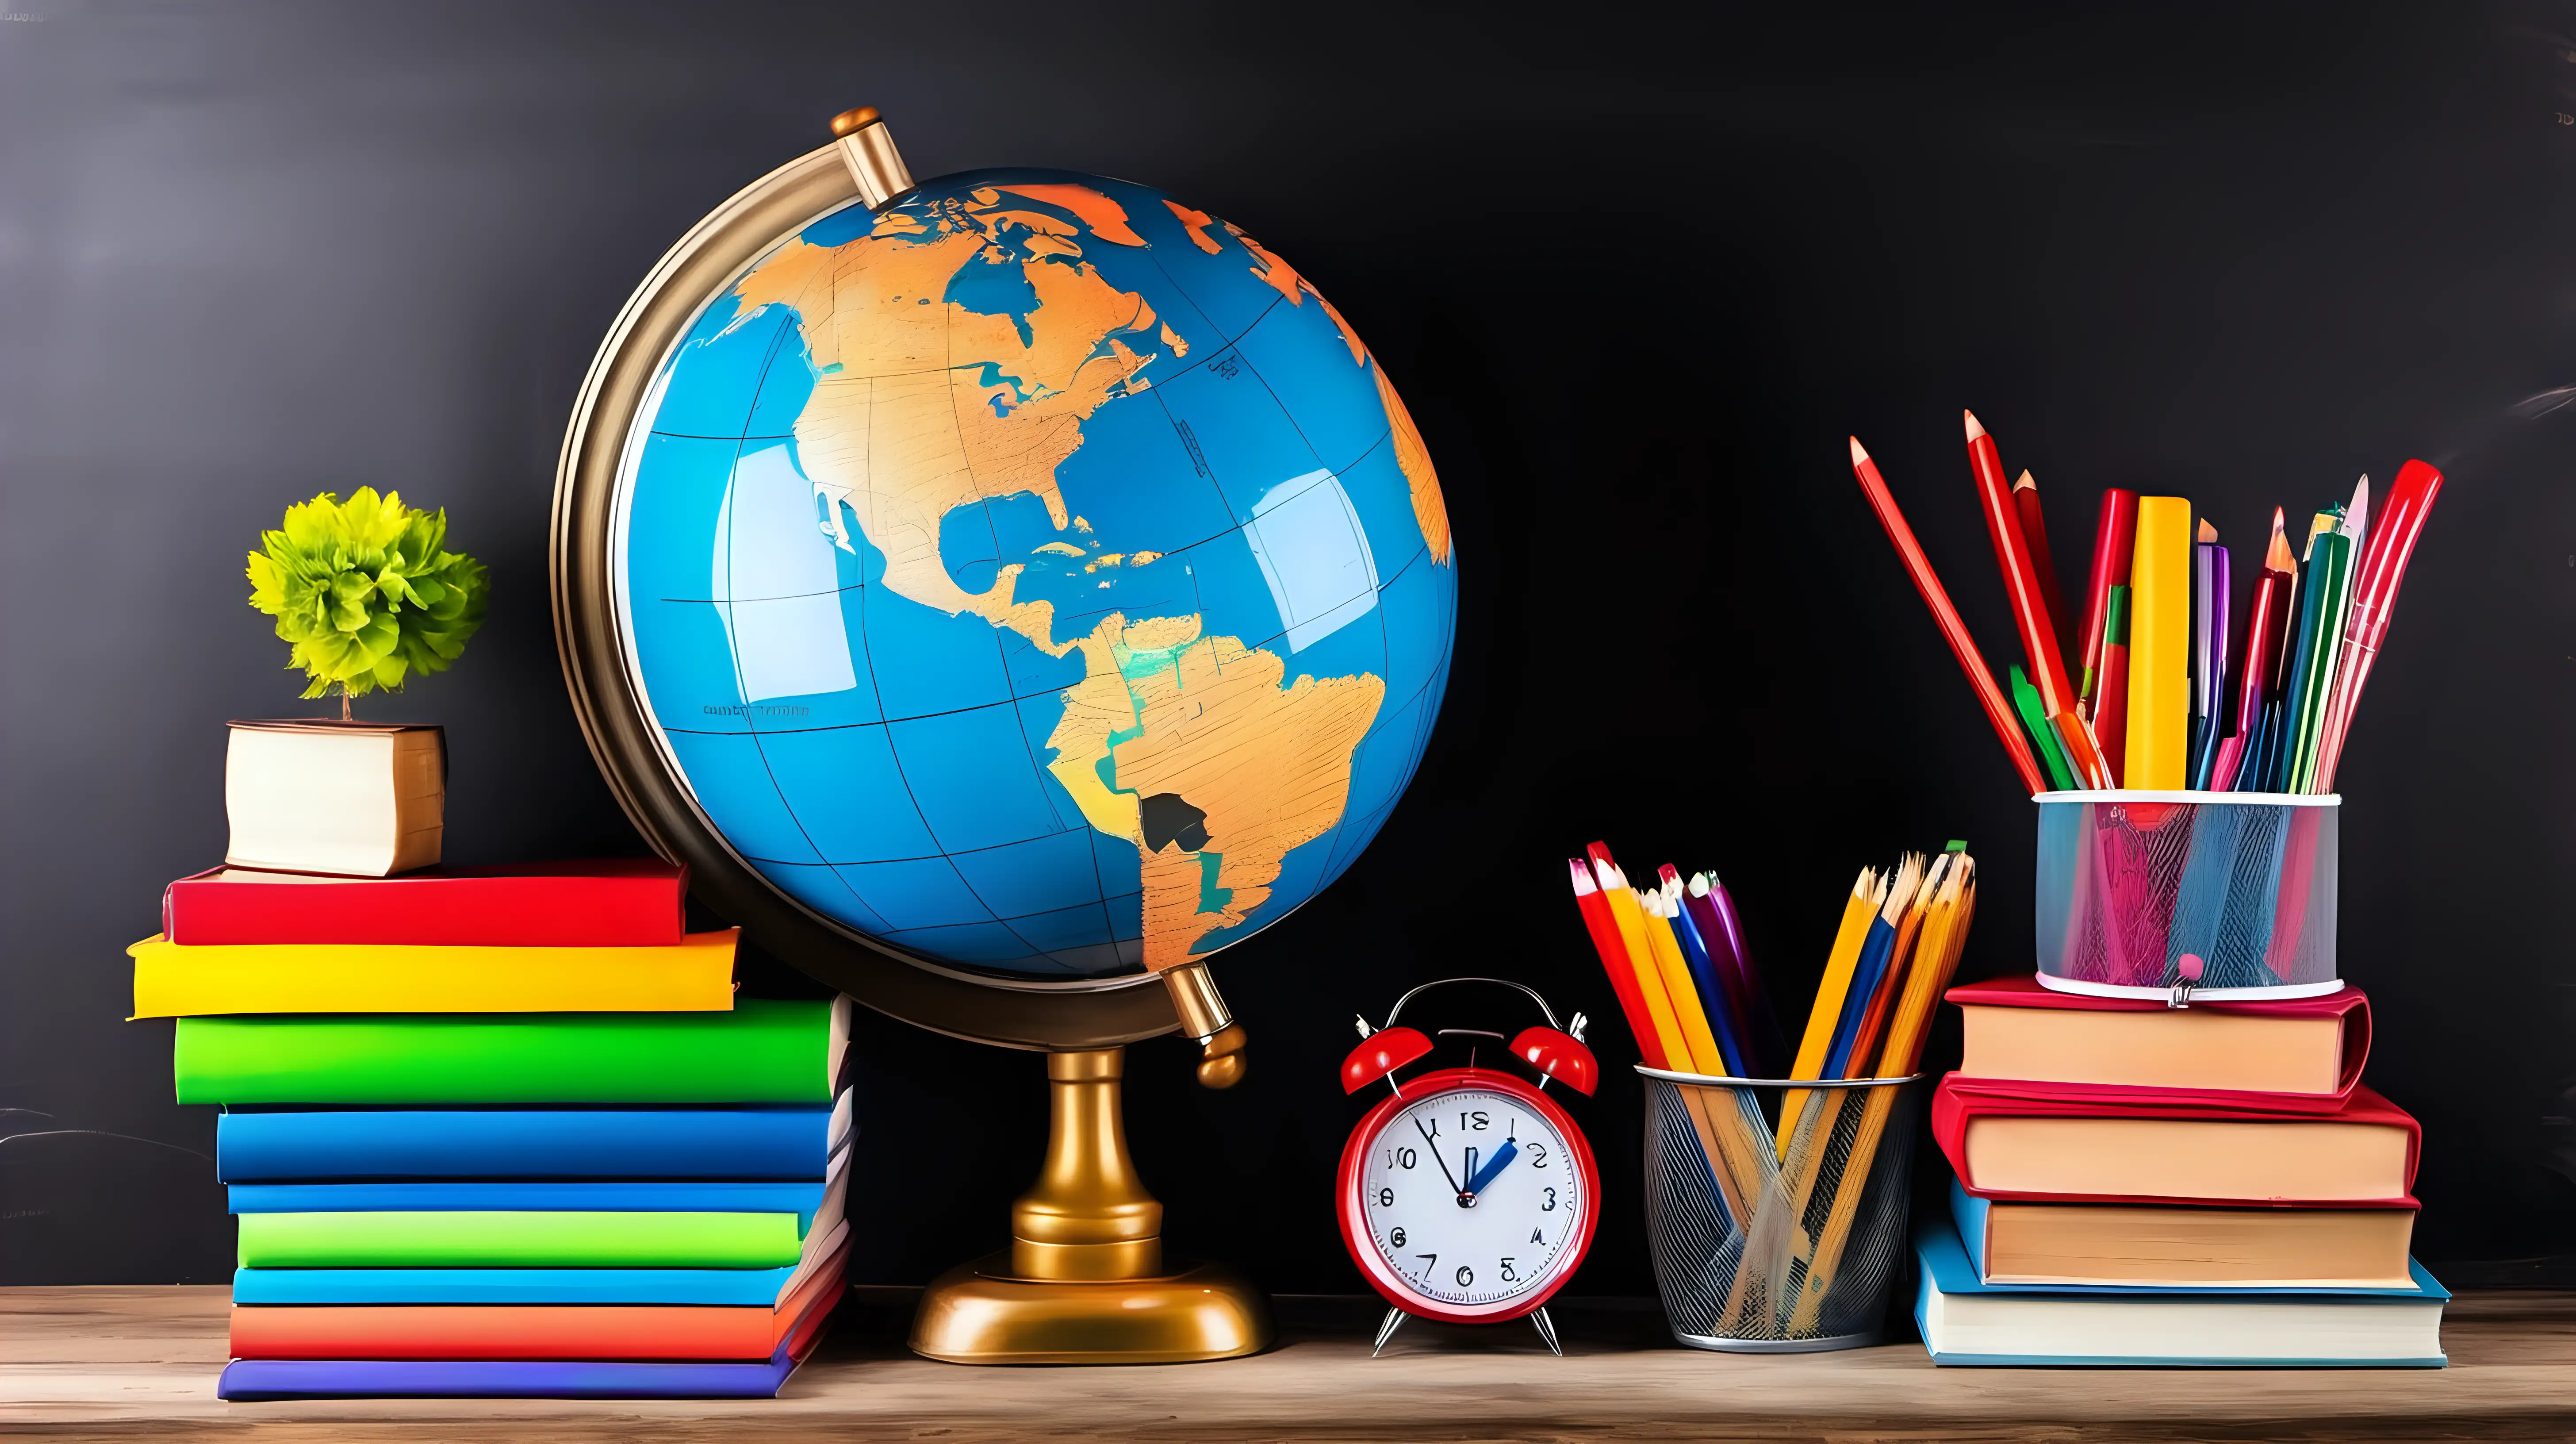 Educational Essentials Colorful Stationery Books and Earth Globe on Wooden Table